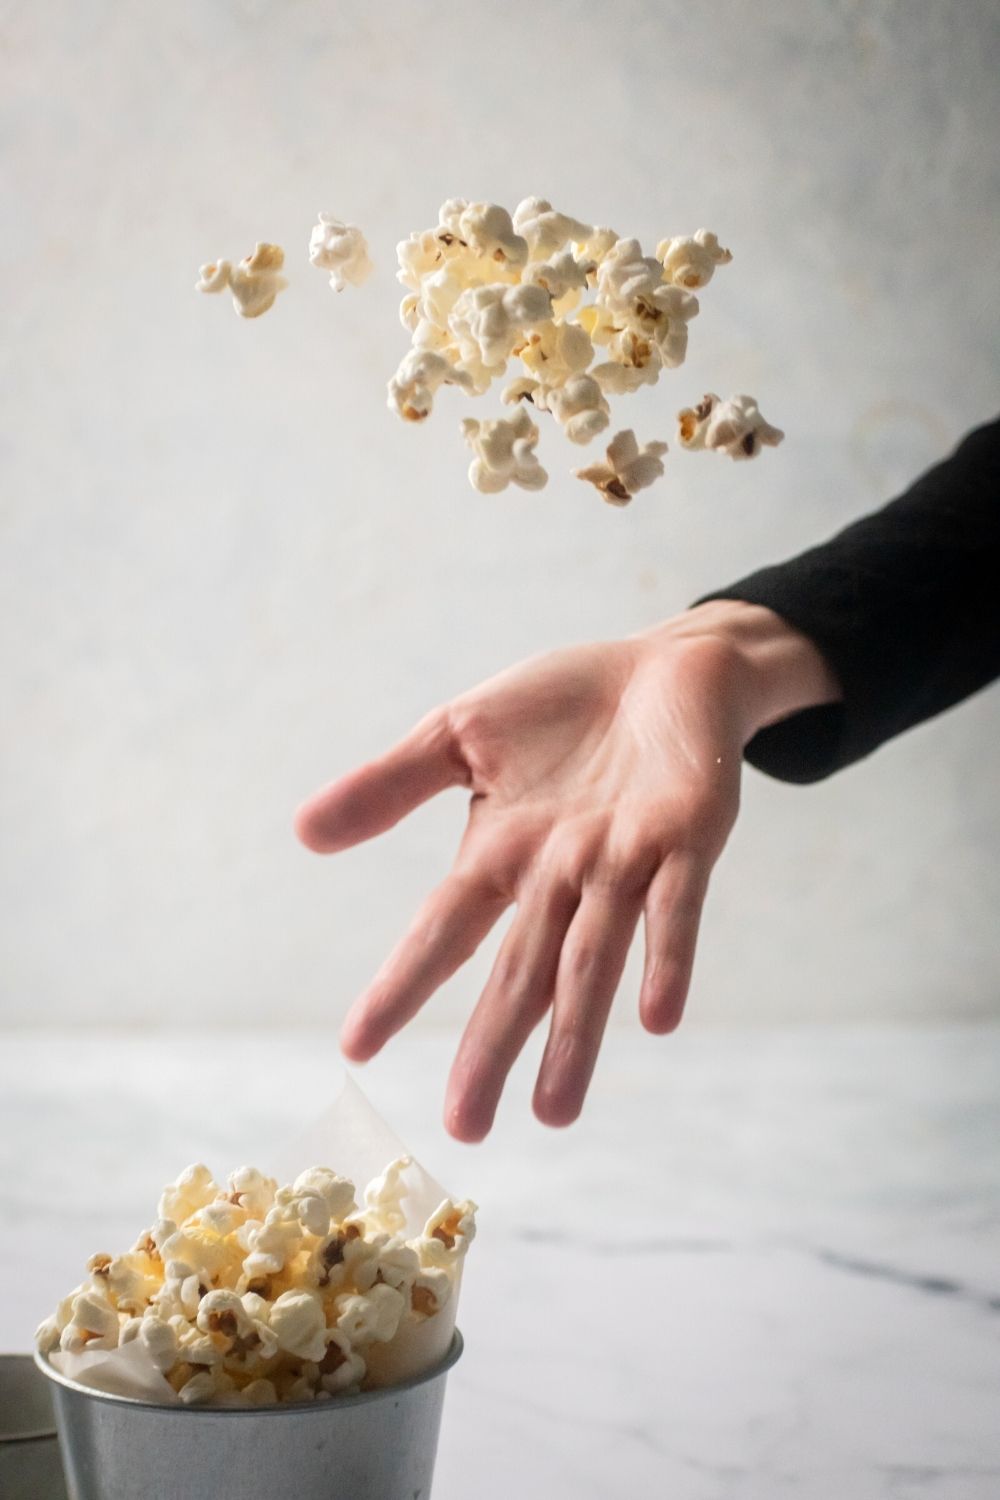 A hand tossing popcorn in the air. Below the hand is part of a tin cup filled with popcorn.